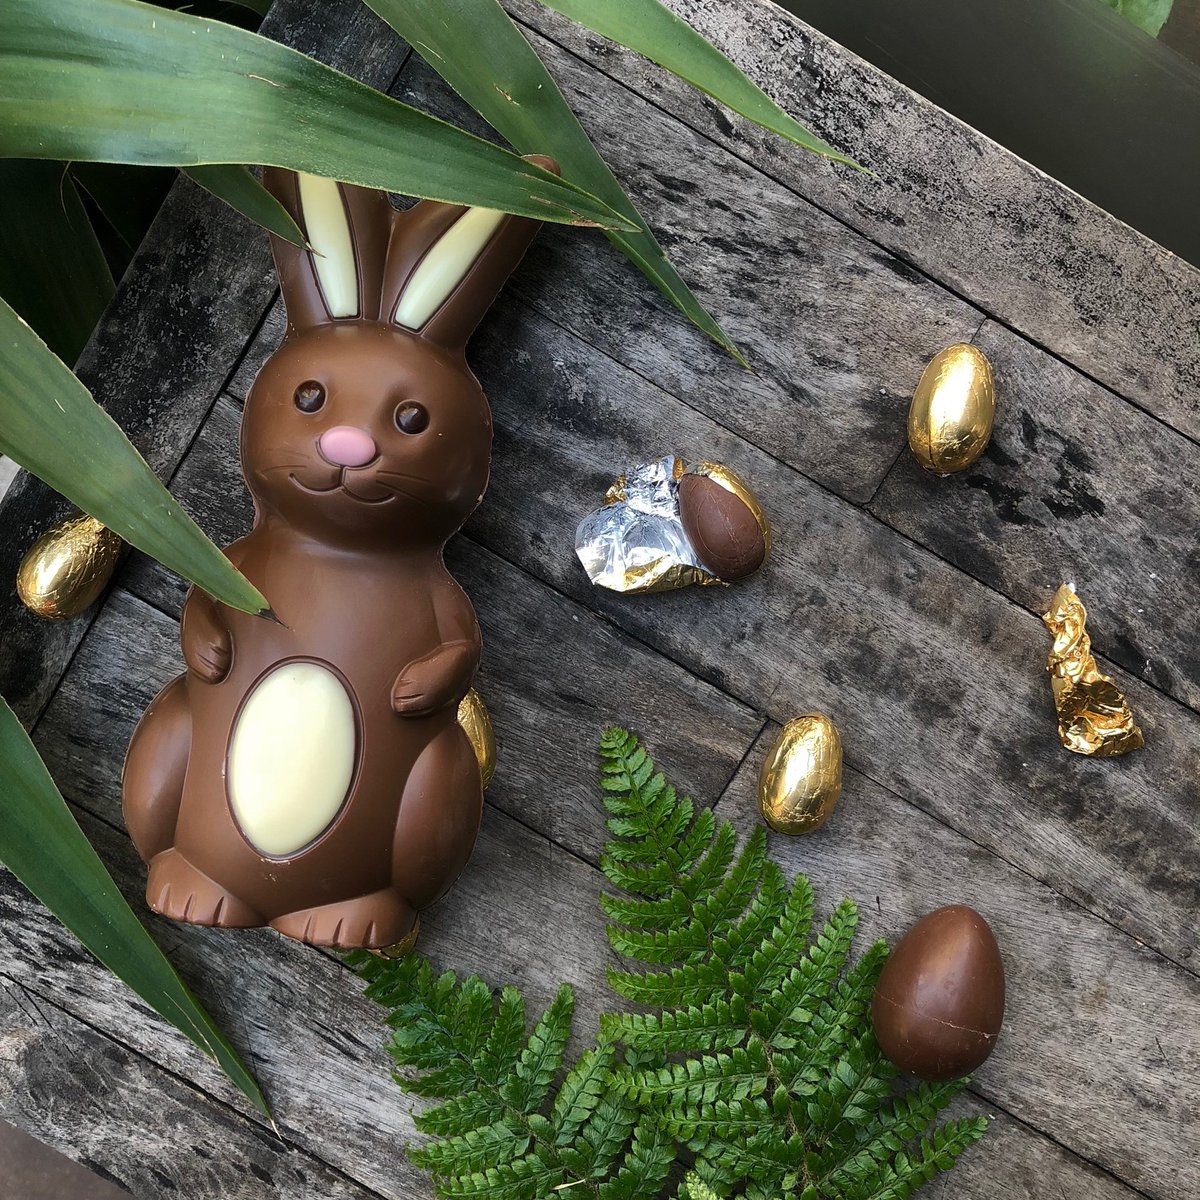 Wishing you all a wonderful Easter Sunday from all of us at Gordon Ramsay Restaurants! #HappyEaster https://t.co/ZHr8MPcY5J